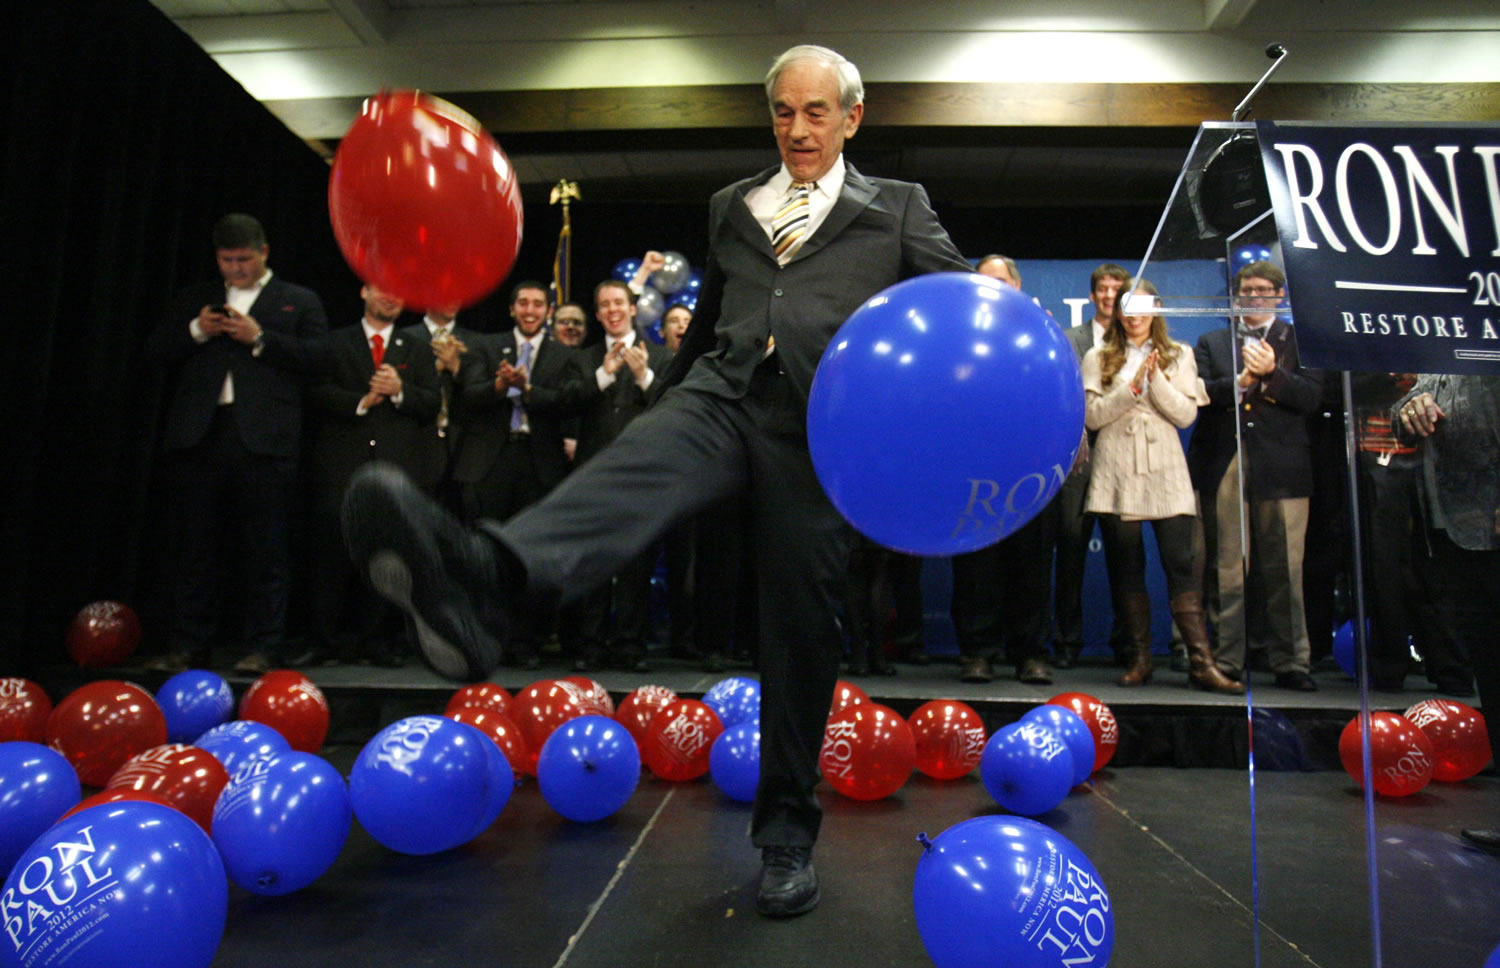 Republican presidential candidate Rep. Ron Paul, R-Texas, kicks balloons from the stage after speaking to supporters following his loss in the Maine caucus to Mitt Romney Feb.